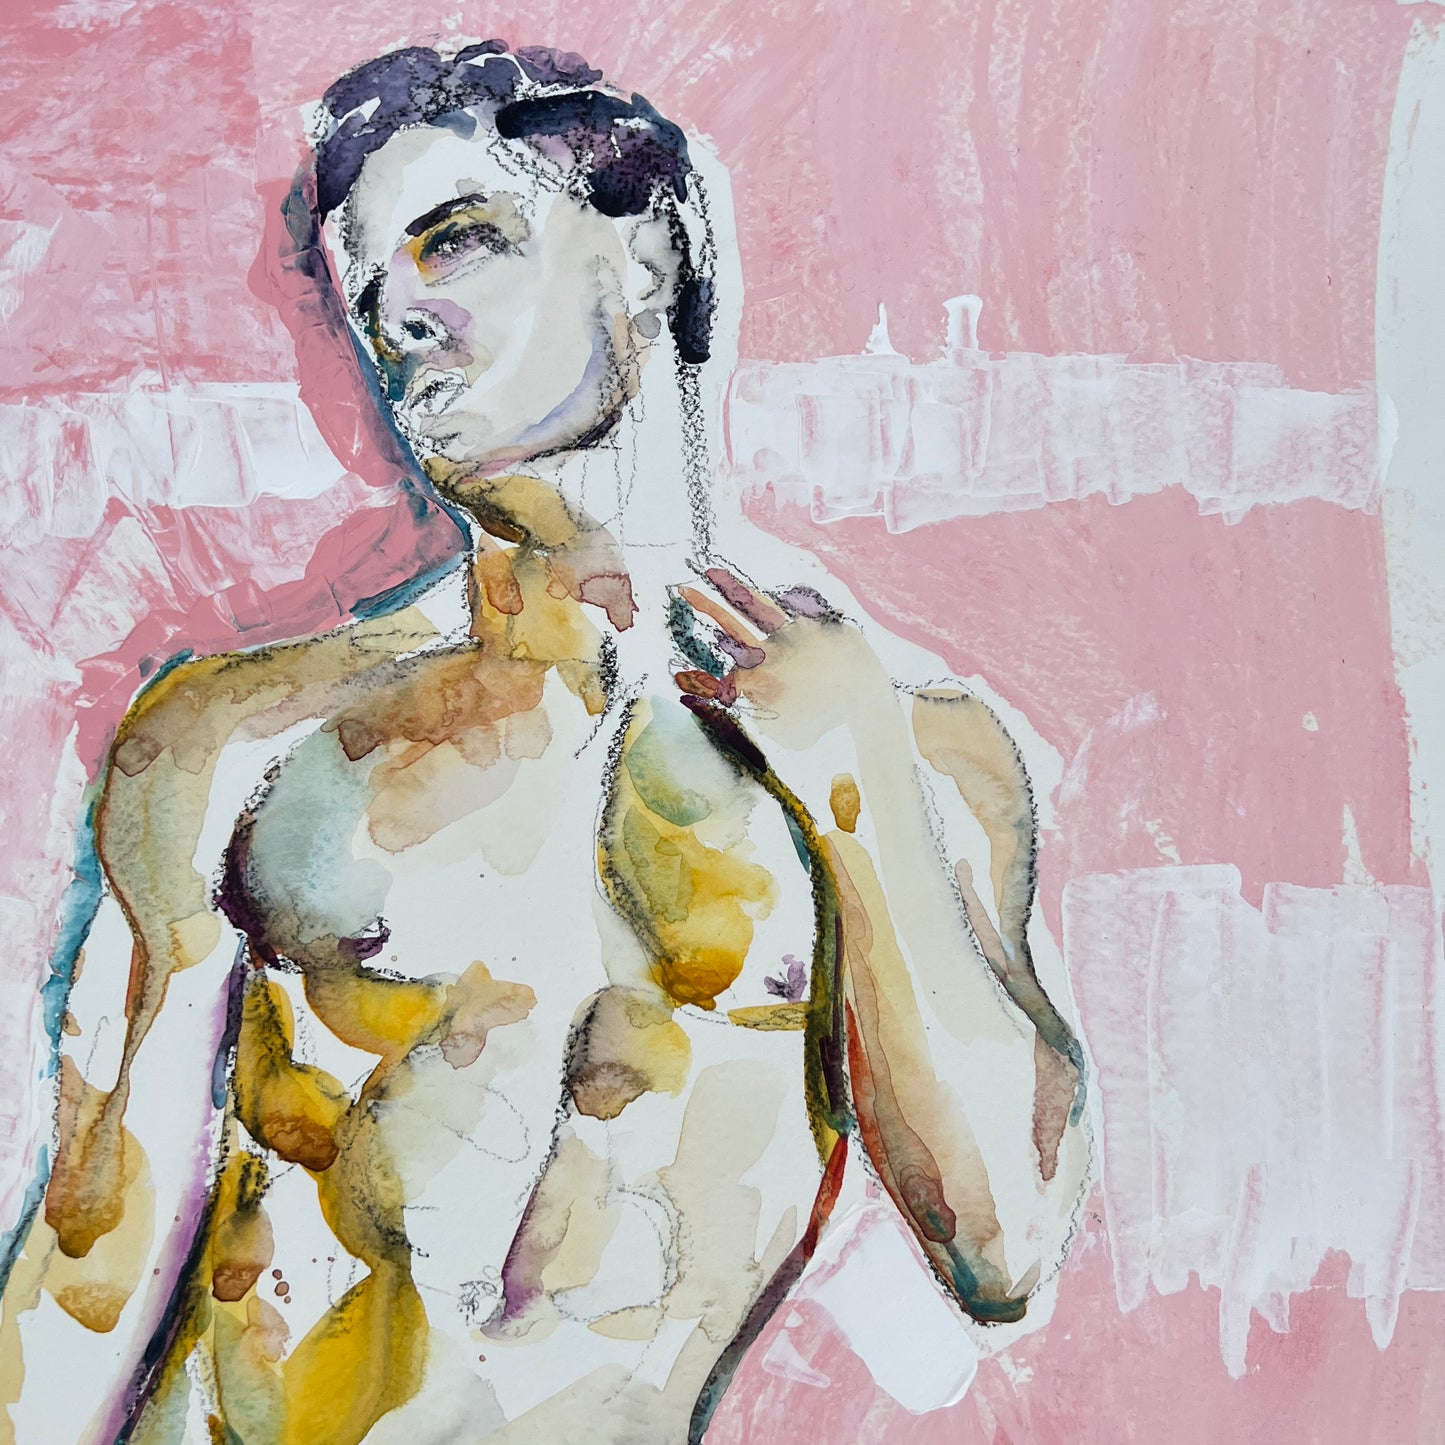 Nude Male with Gold Highlights and Draped Cloth - 18x24" Original Painting